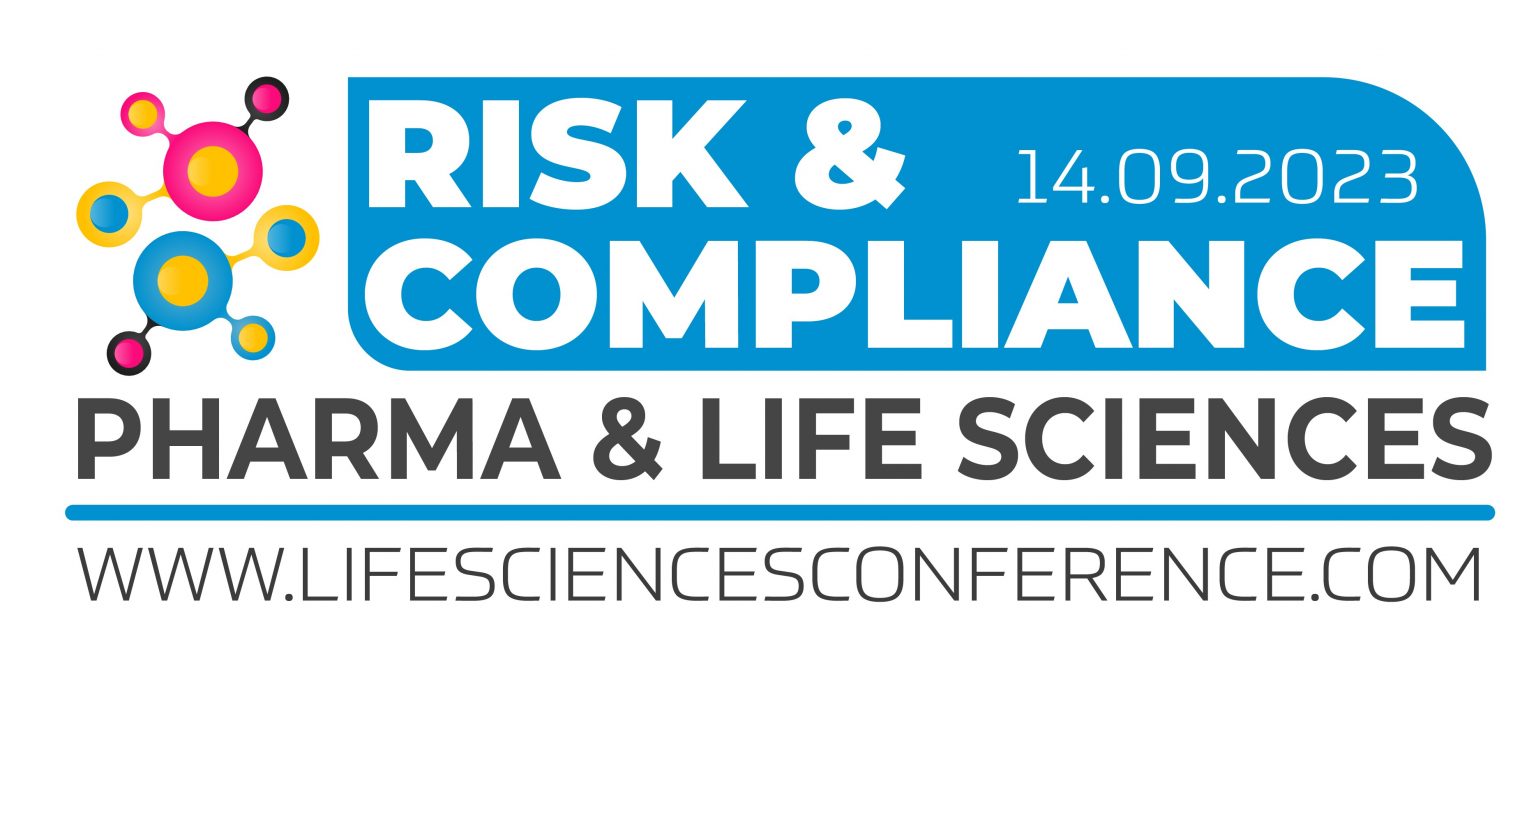 Risk & Compliance Pharma & Life Sciences Conference 